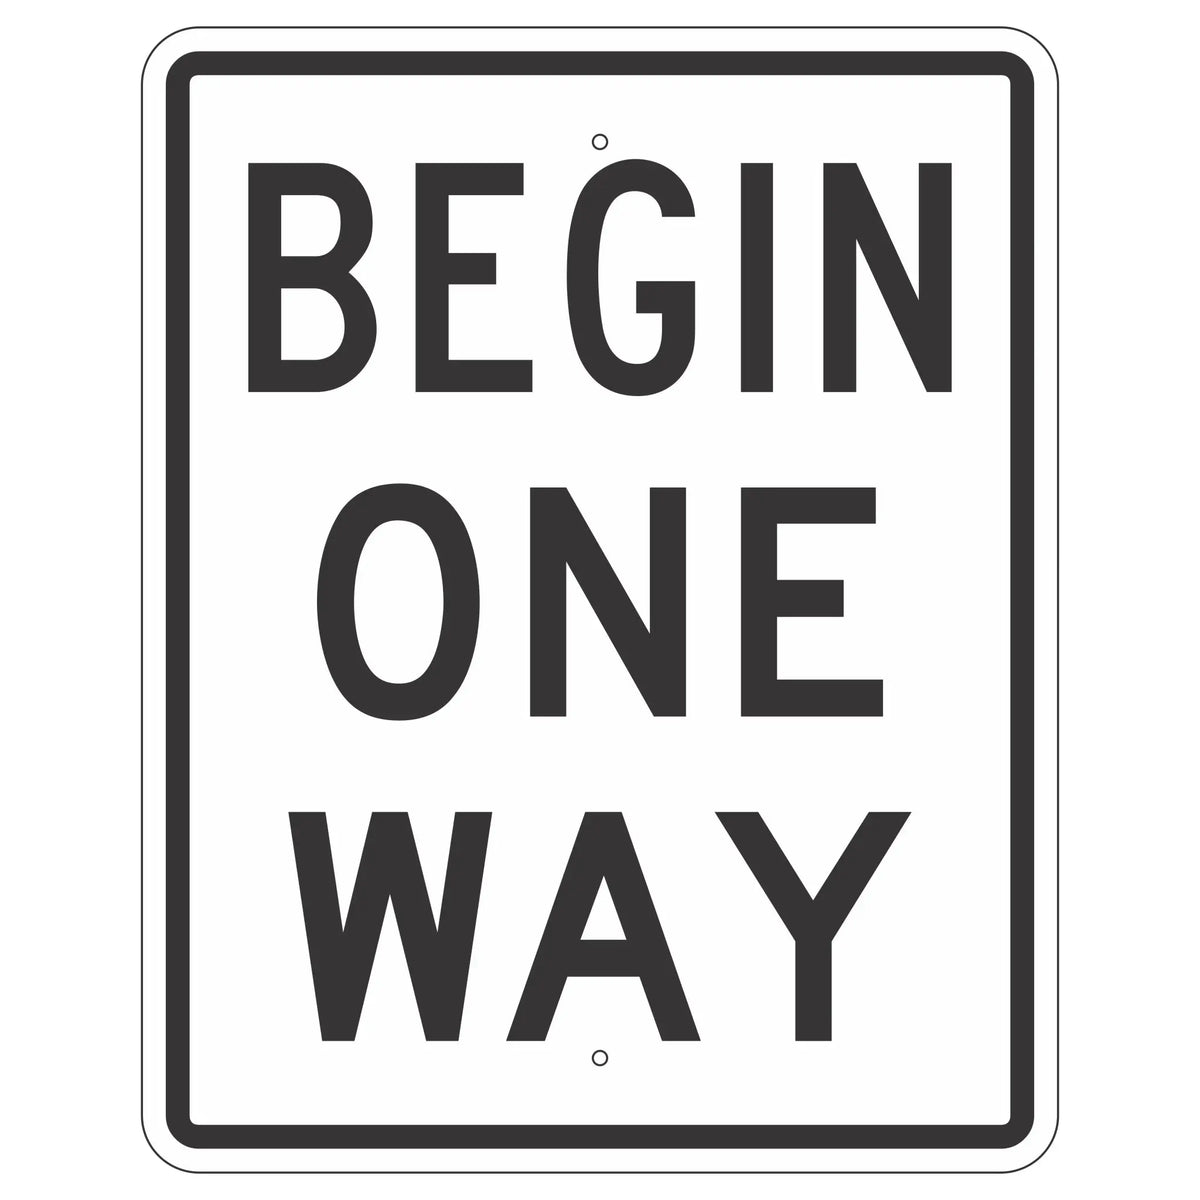 One Way Right Sign